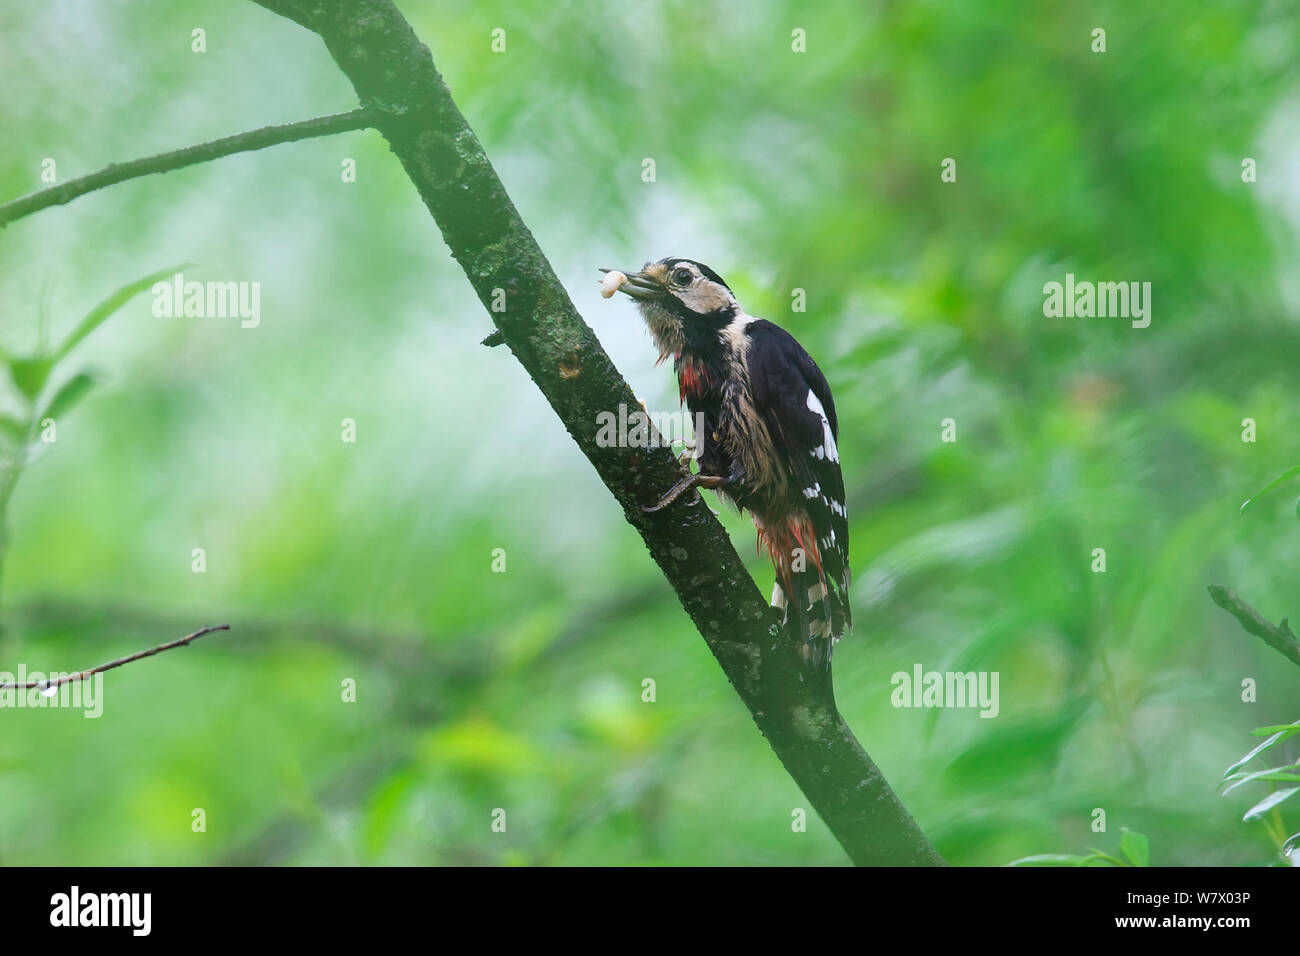 Crimson-breasted Woodpecker (Dendrocopos cathpharius) perched, Dujiangyan City, Sichuan Province, China, Asia Stock Photo